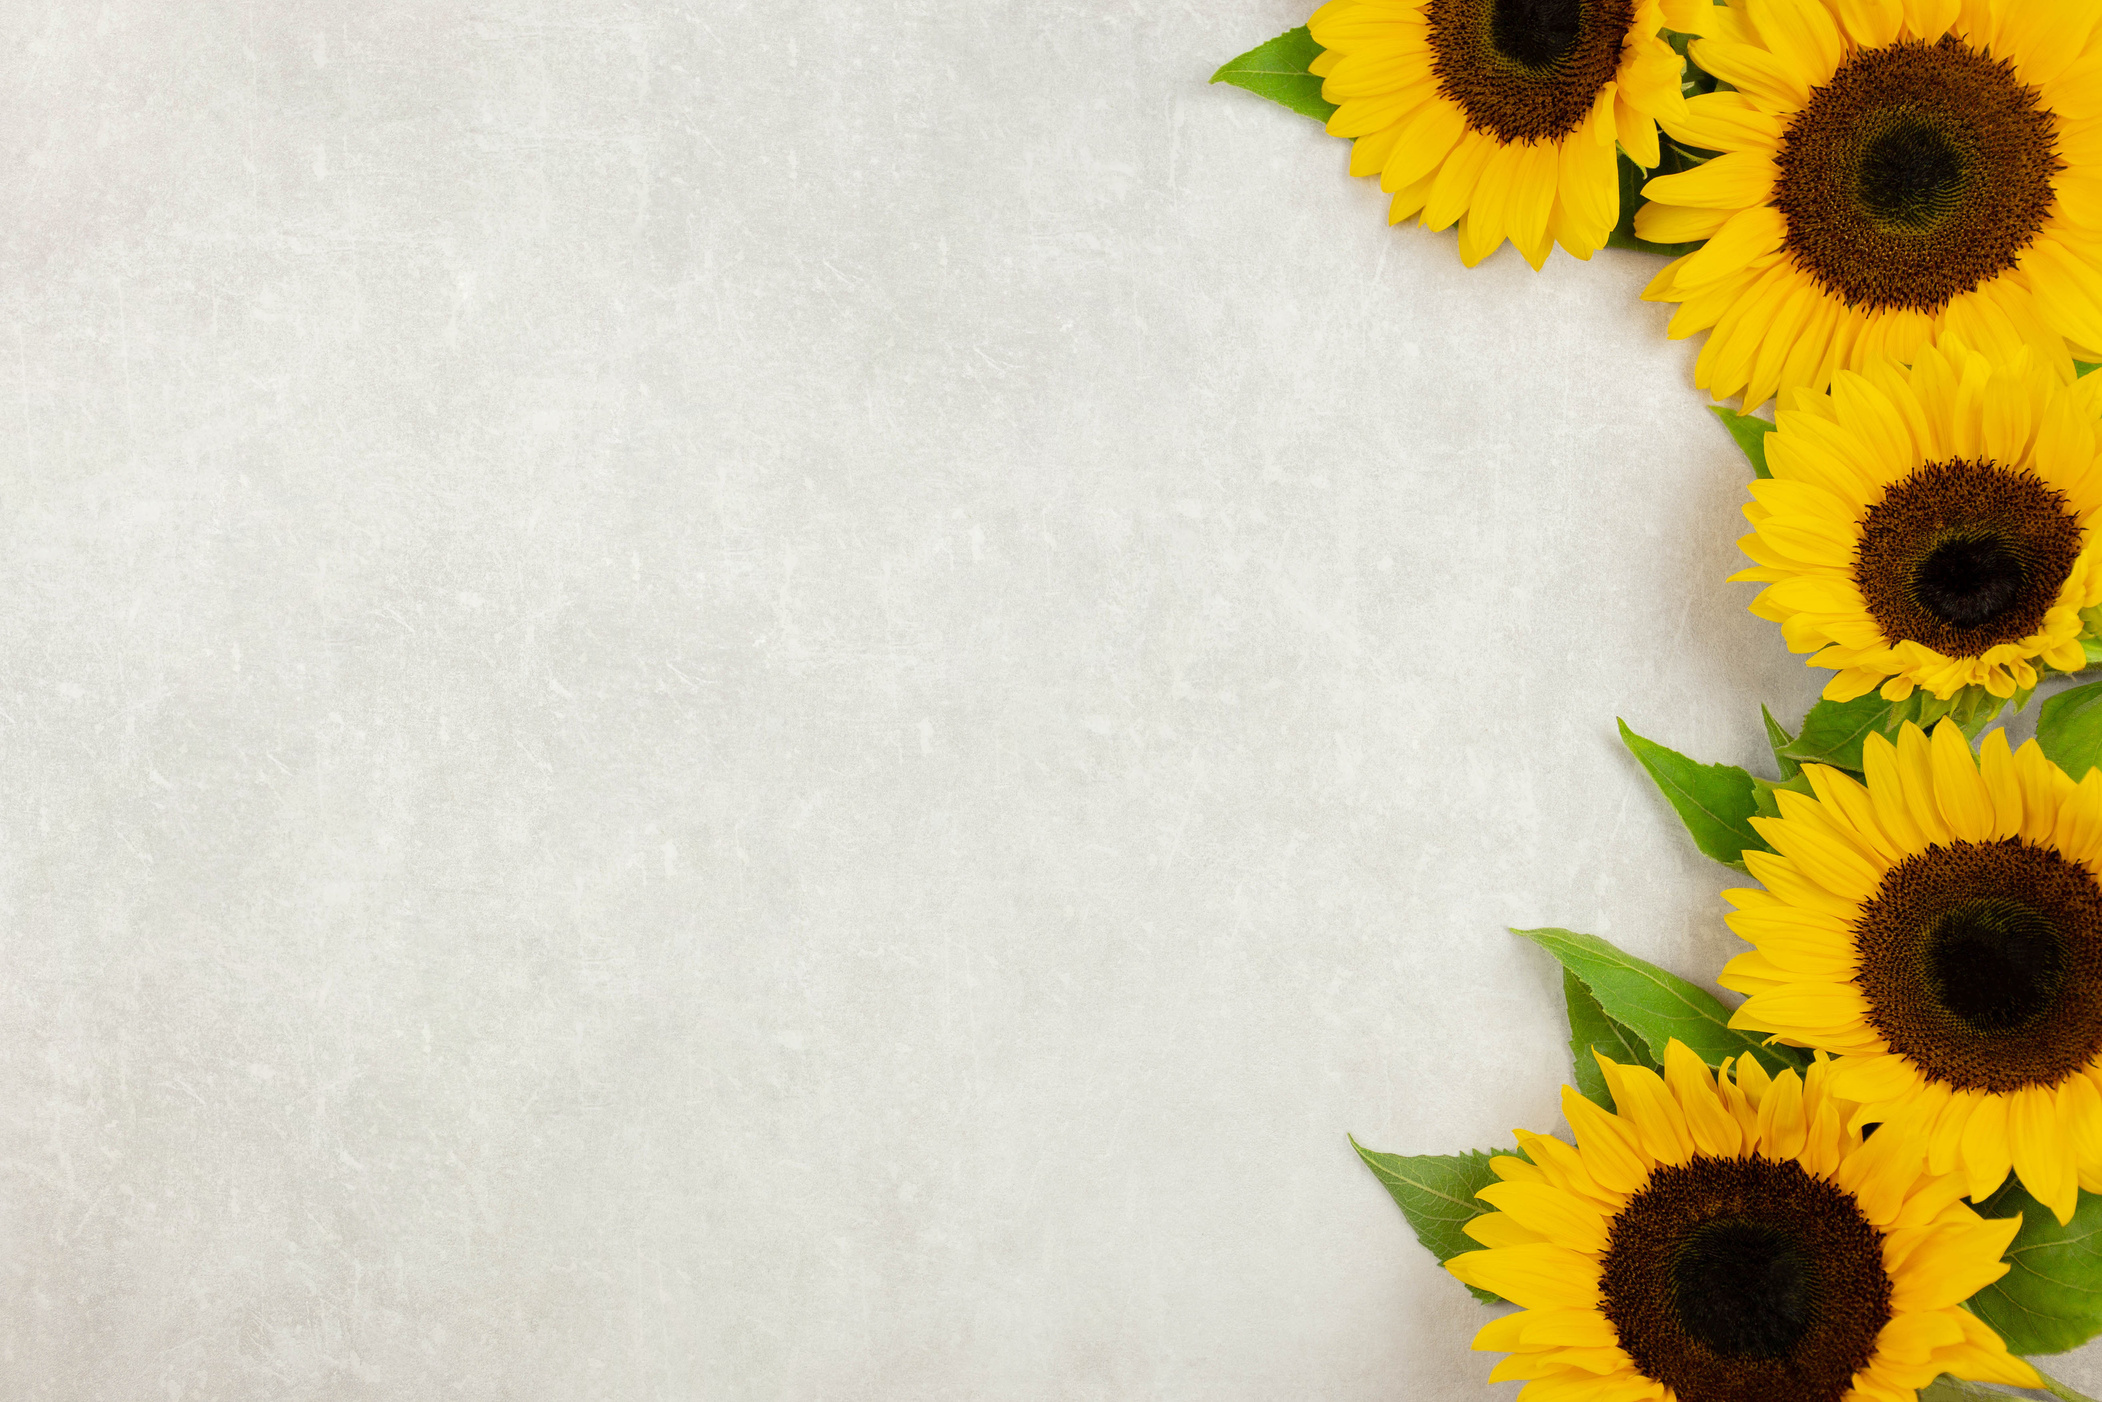 Off White Background with Sunflowers